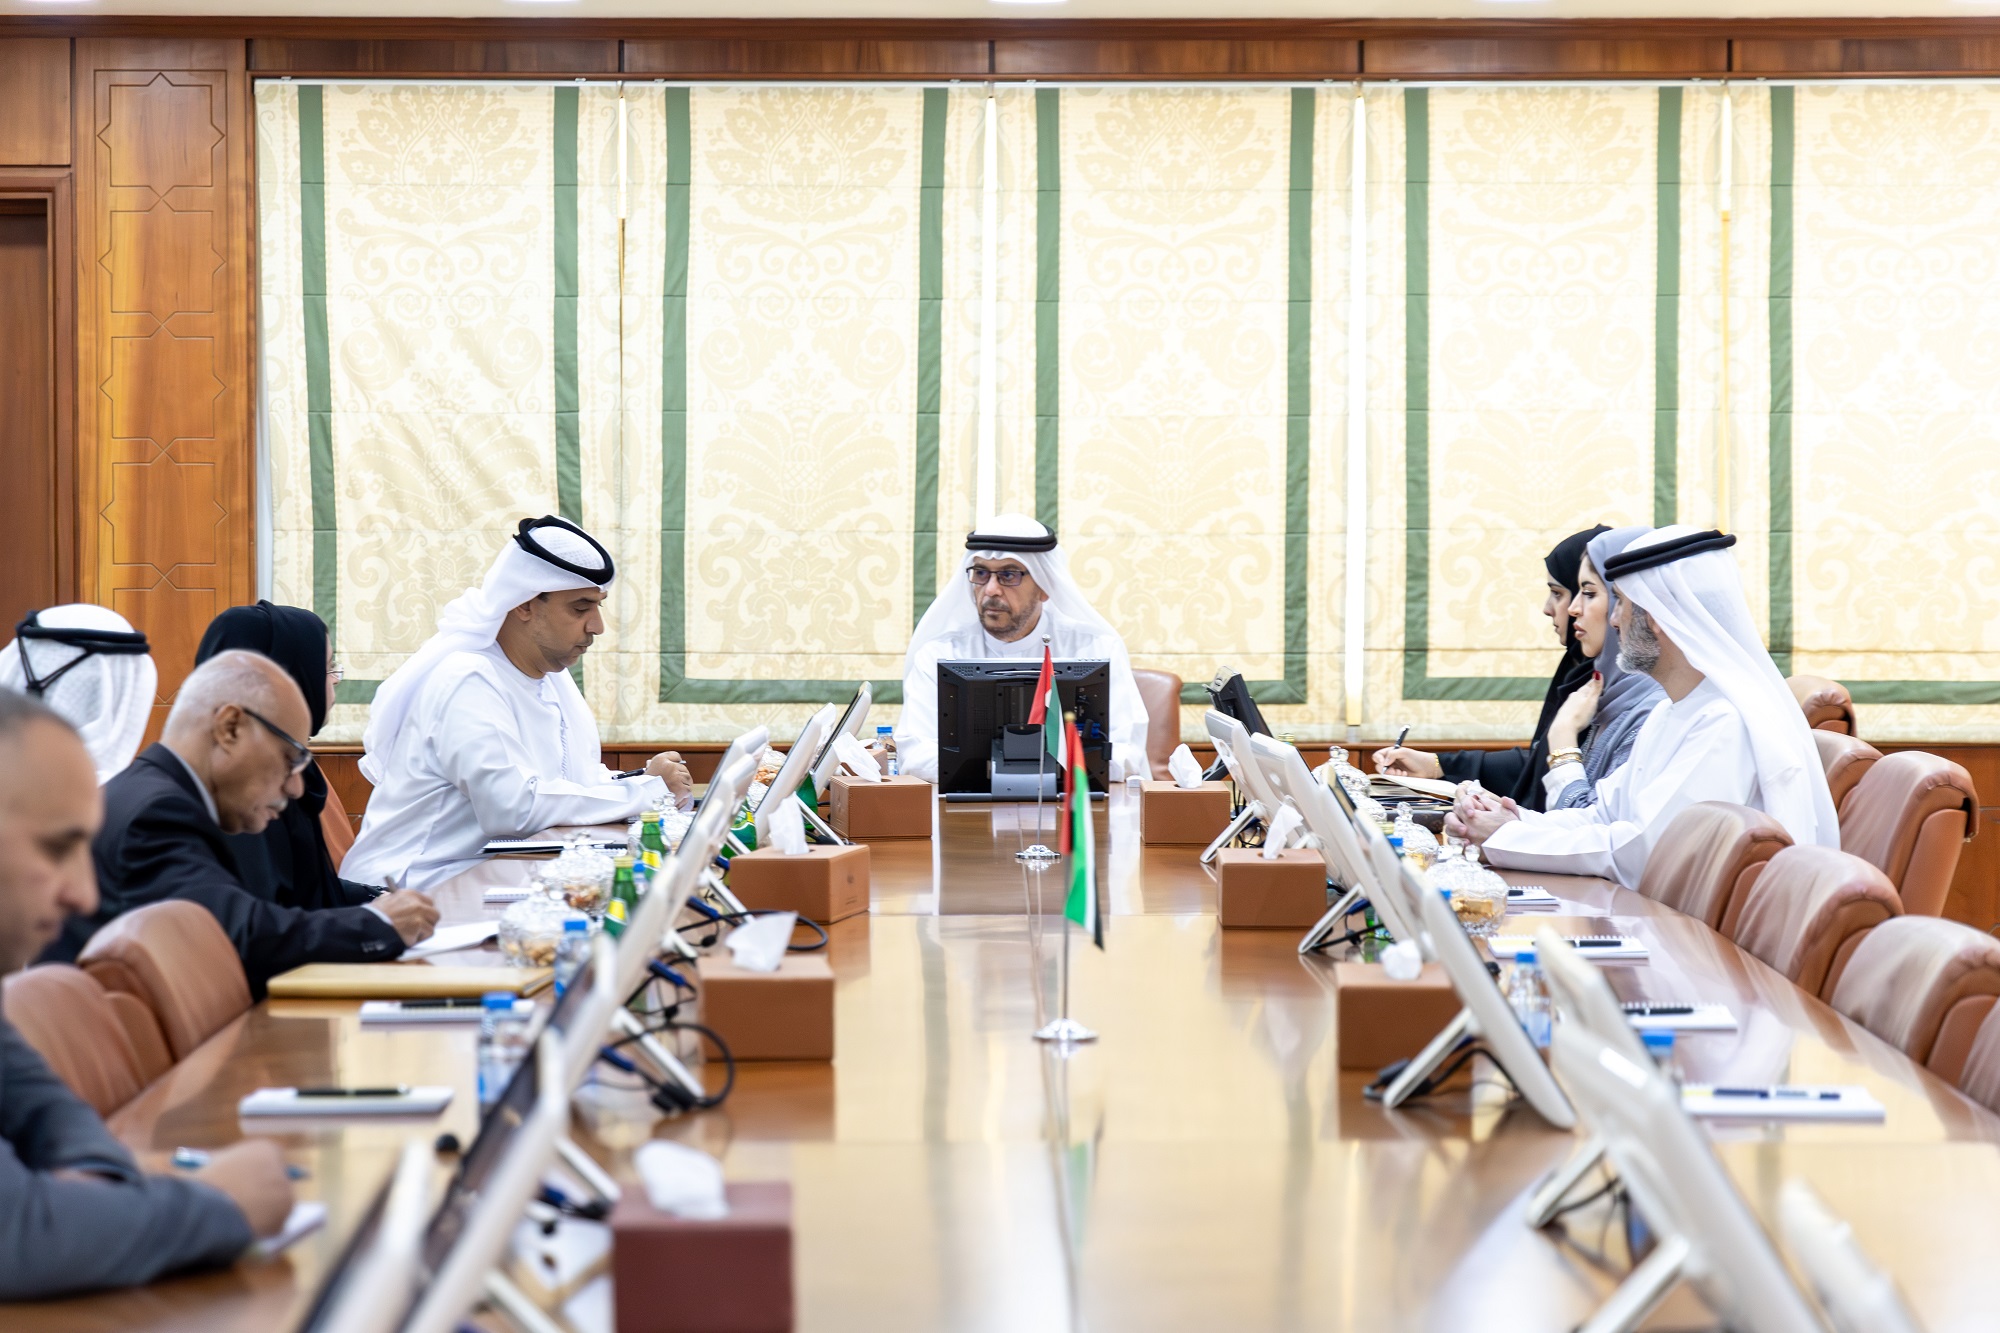 A coordination meeting between government entities in Ajman with a view to enhancing joint cooperation